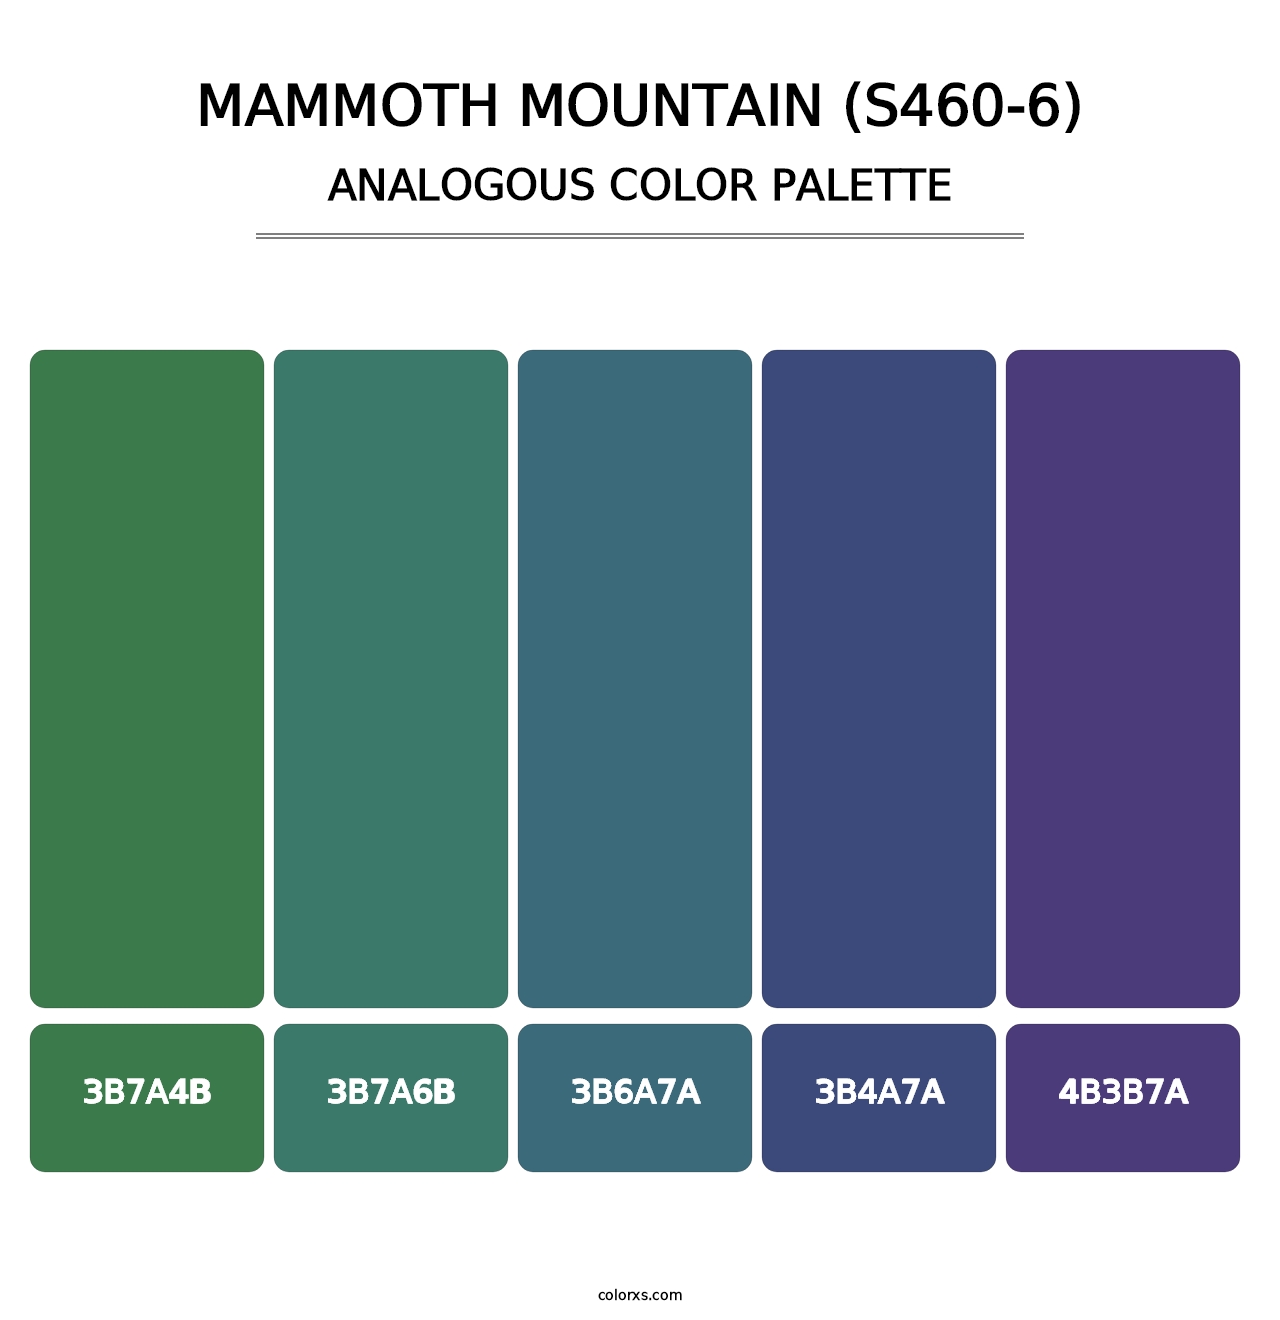 Mammoth Mountain (S460-6) - Analogous Color Palette